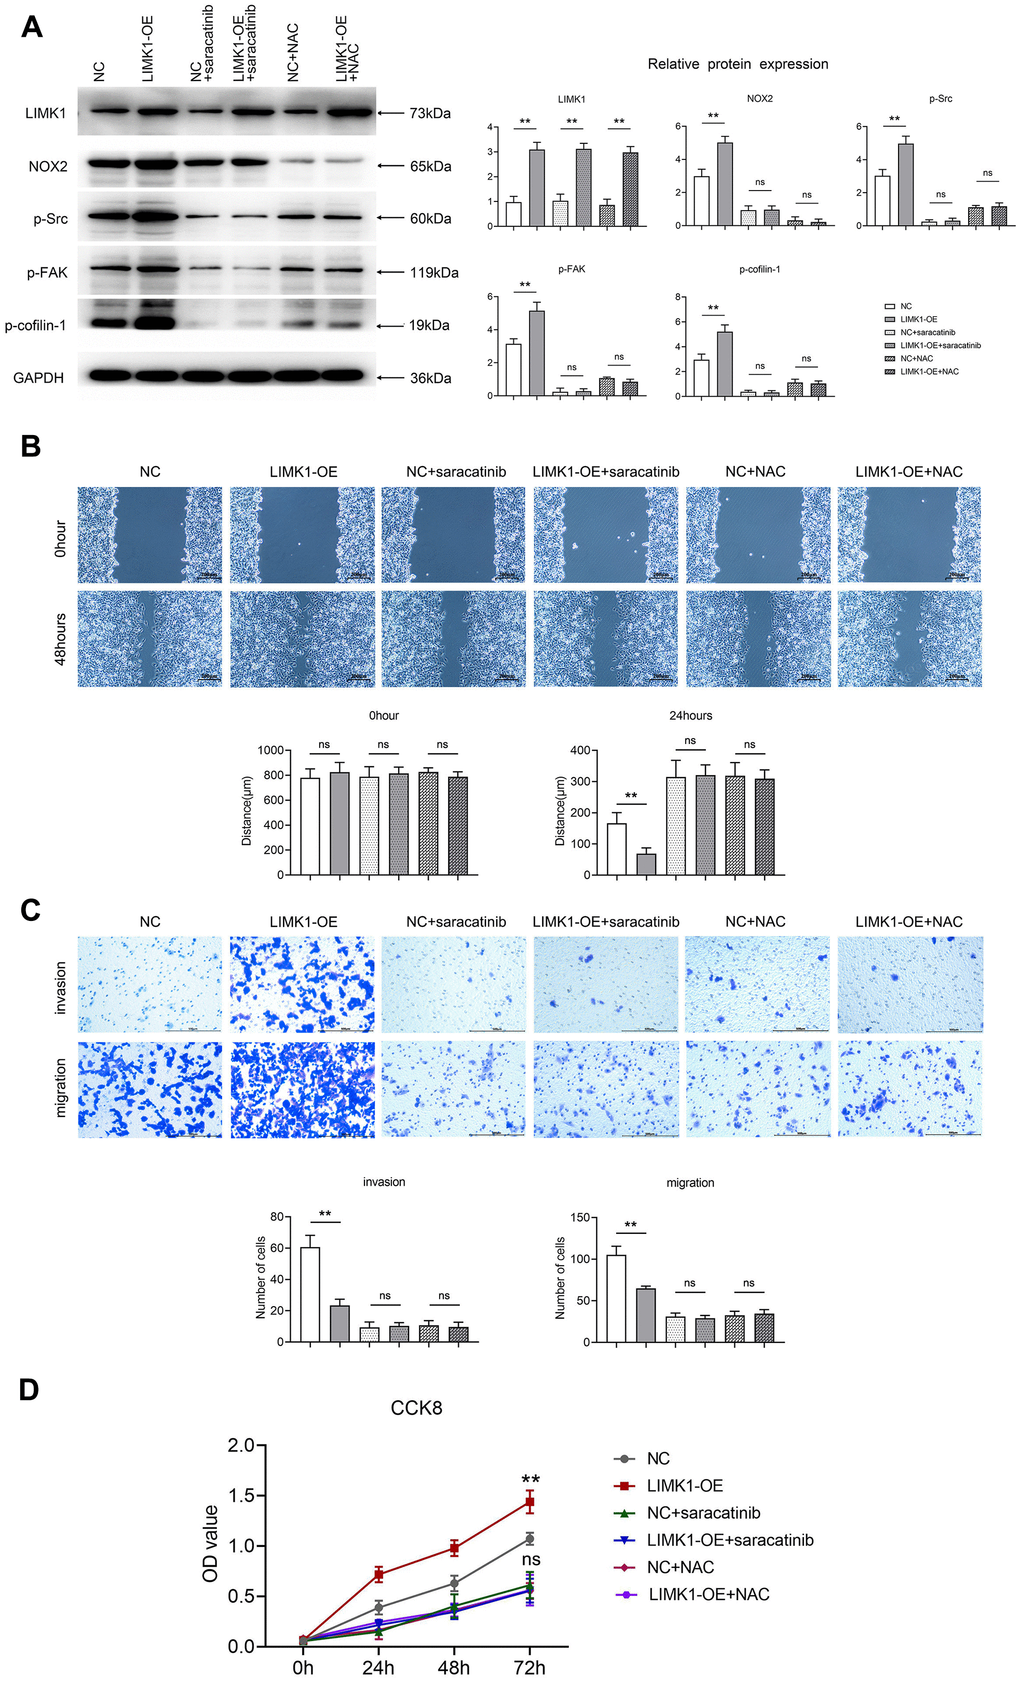 LIMK1 regulated the expression of p-FAK and p-Cofilin-1 proteins by regulating ROS and p-Src. (A) Effect of 5.0 μM Saracatinib or 5 mM NAC-treated SiHa cells on the expression of LIMK1, NOX2, p-Src, p-FAK, and p-Cofilin-1 proteins in cervical cancer cells and histograms of statistical analyses by Western blotting. (B) Plot of the results of the cell scratch experiment and statistics of cell scratch spacing. (C) Graphs of the results of Transwell experiments and statistics on the number of cells migrating and invading. (D) CCK8 experimental results are plotted. **PnsP>0.05 indicates that the difference is not statistically significant.